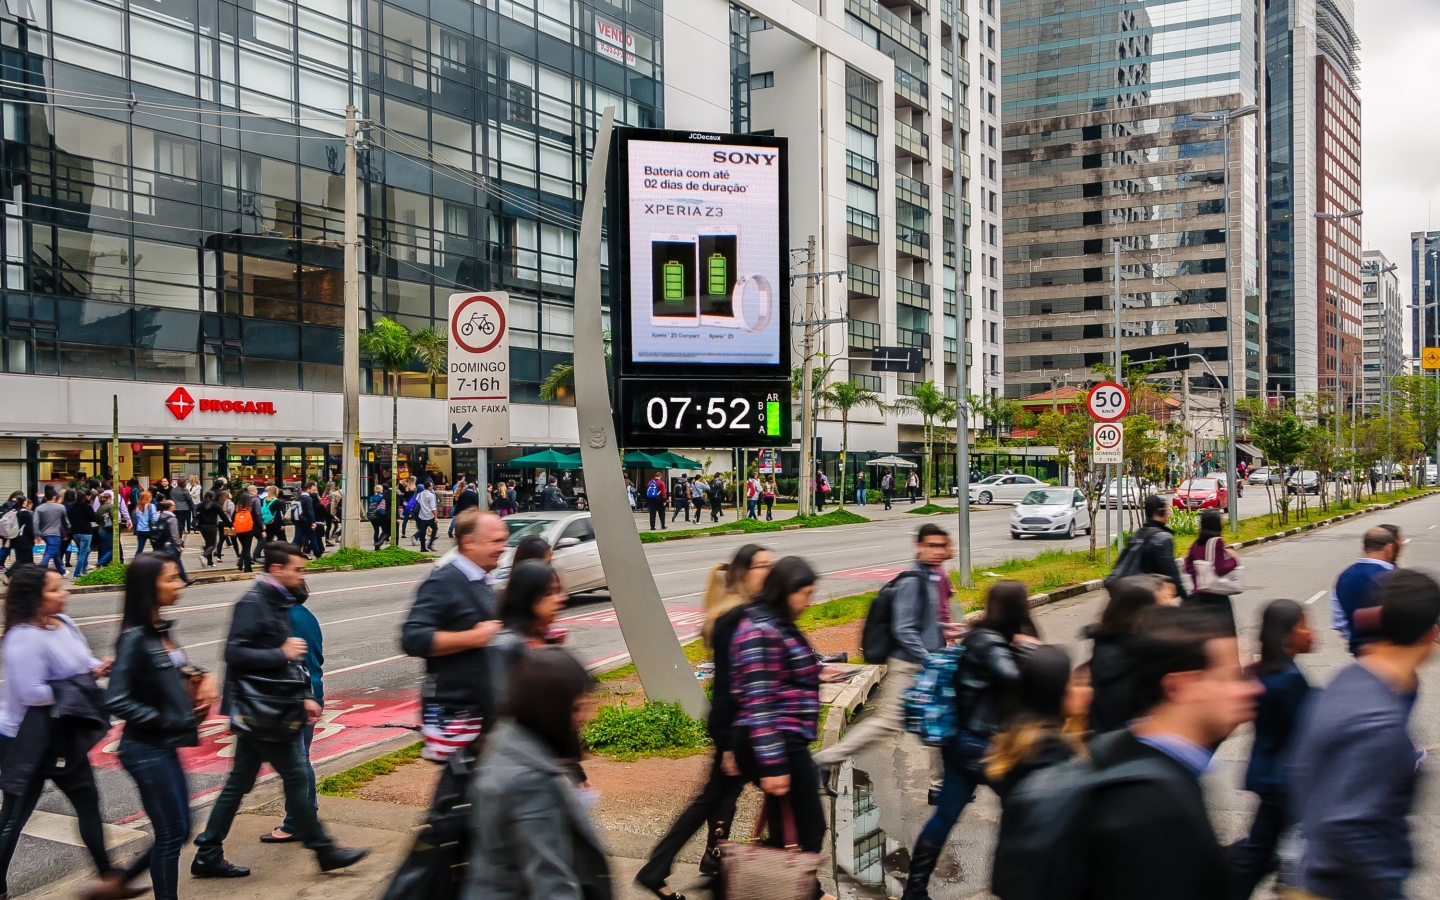 OOH Audience Measurement 101: Sony digital campaign in the urban centre of Brazil's Sao Paolo